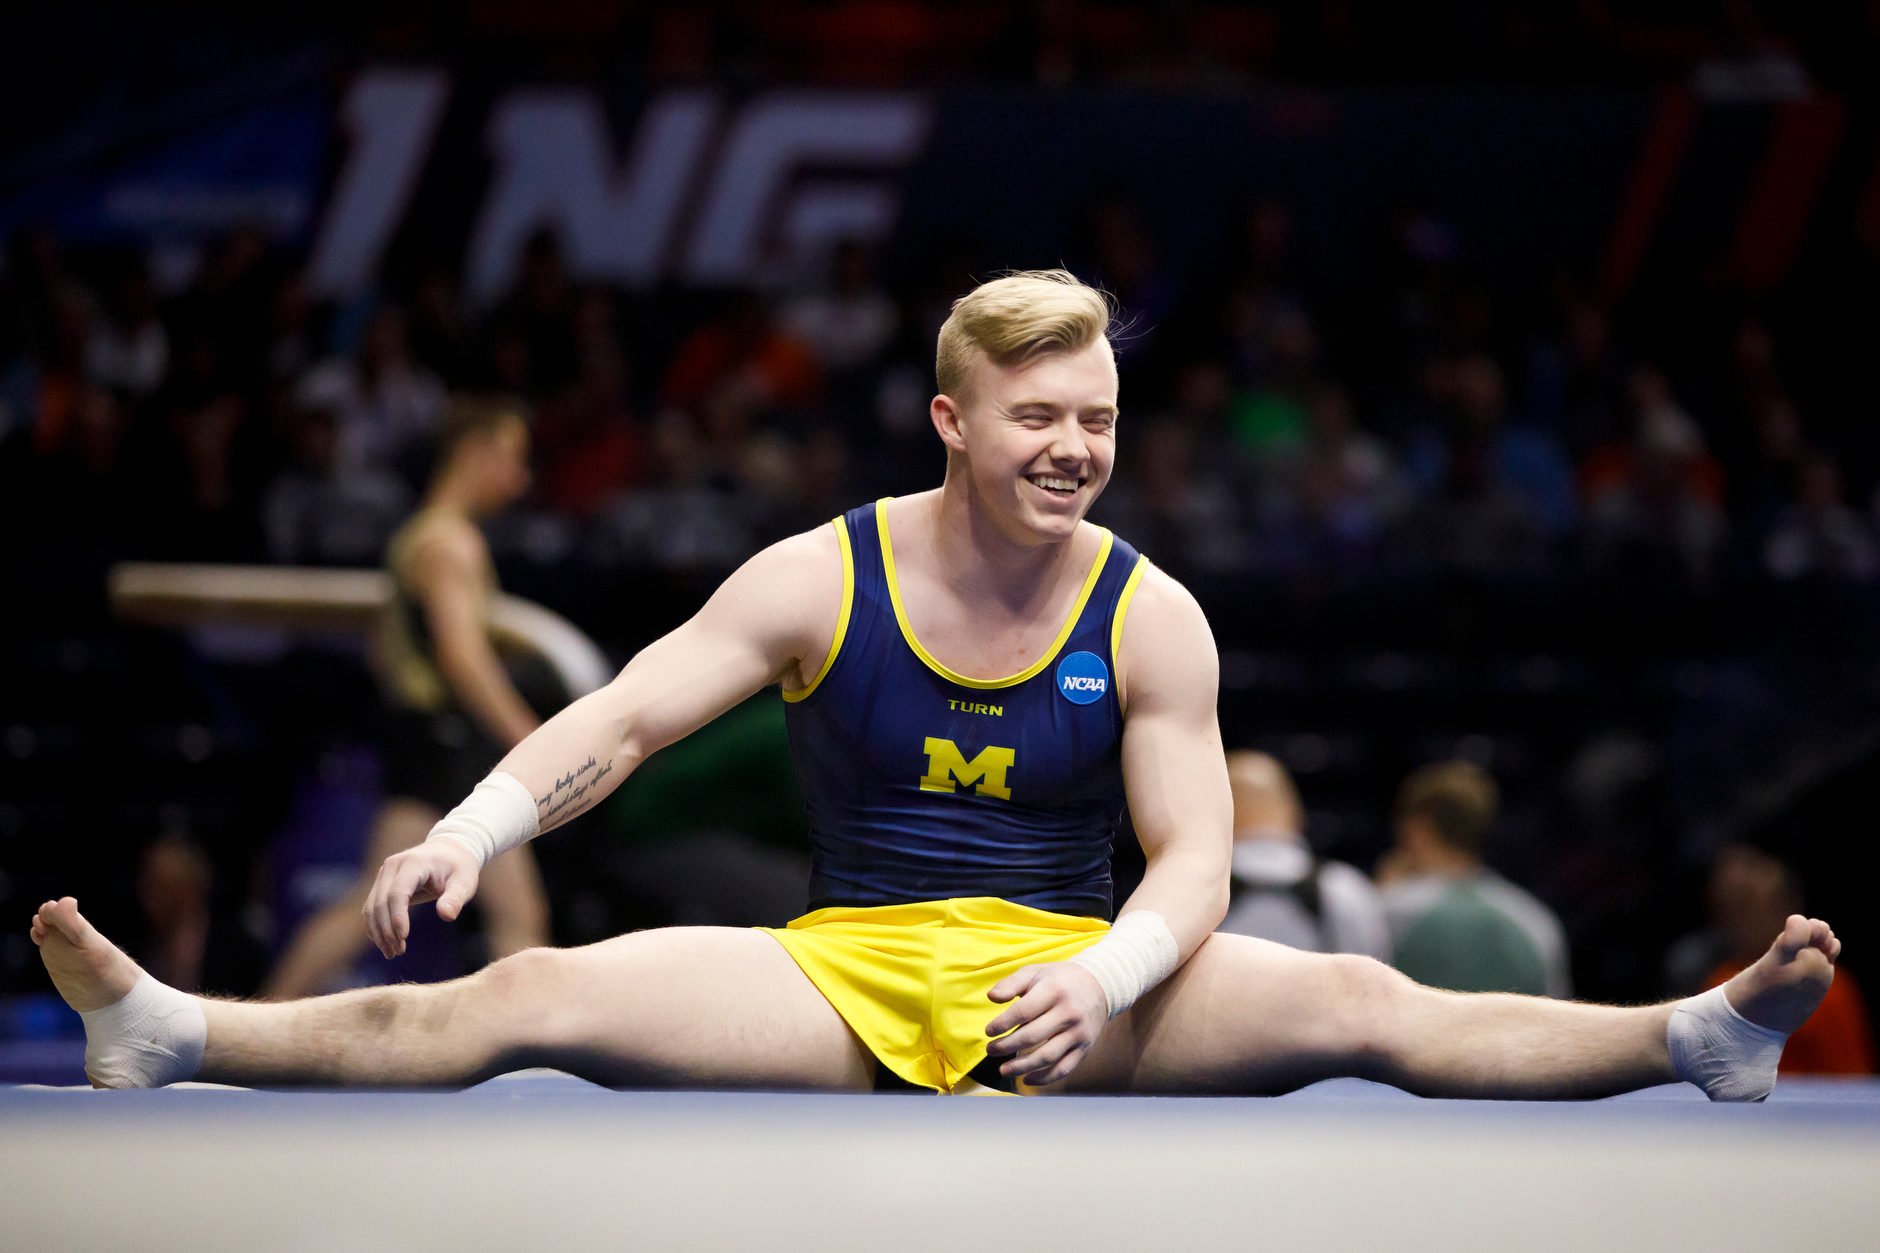 Michigan's Cameron Bock warms up before the floor exercise at the NCAA Men's Gymnastics Championships on Saturday, April 20, 2019, at the State Farm Center in Champaign, Illinois. (Photo by James Brosher)